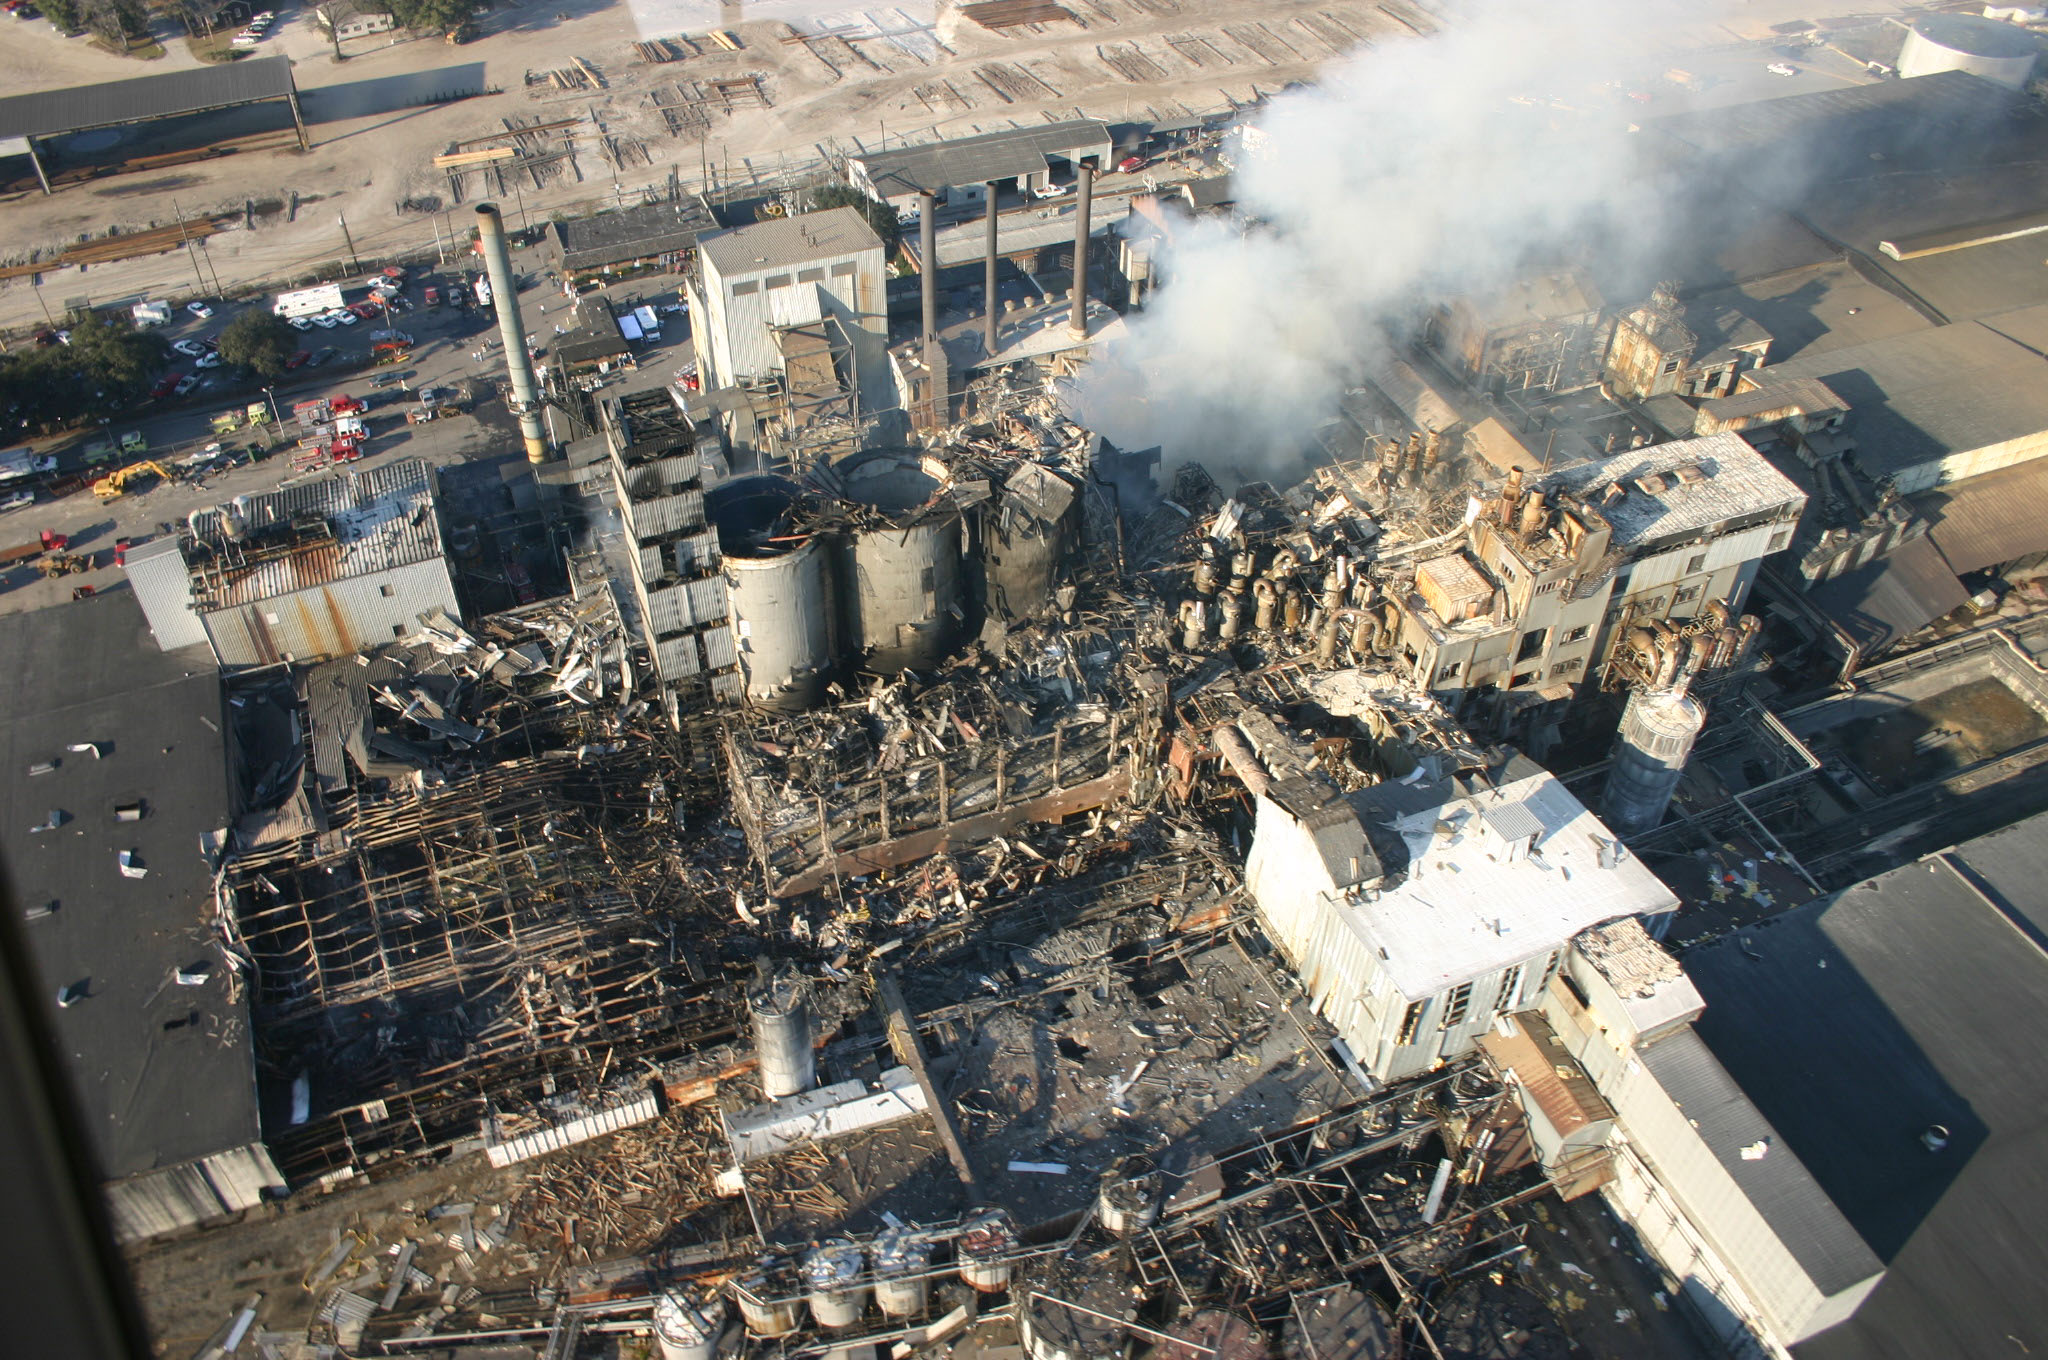 The aftermath of a combustible dust explosion in the US